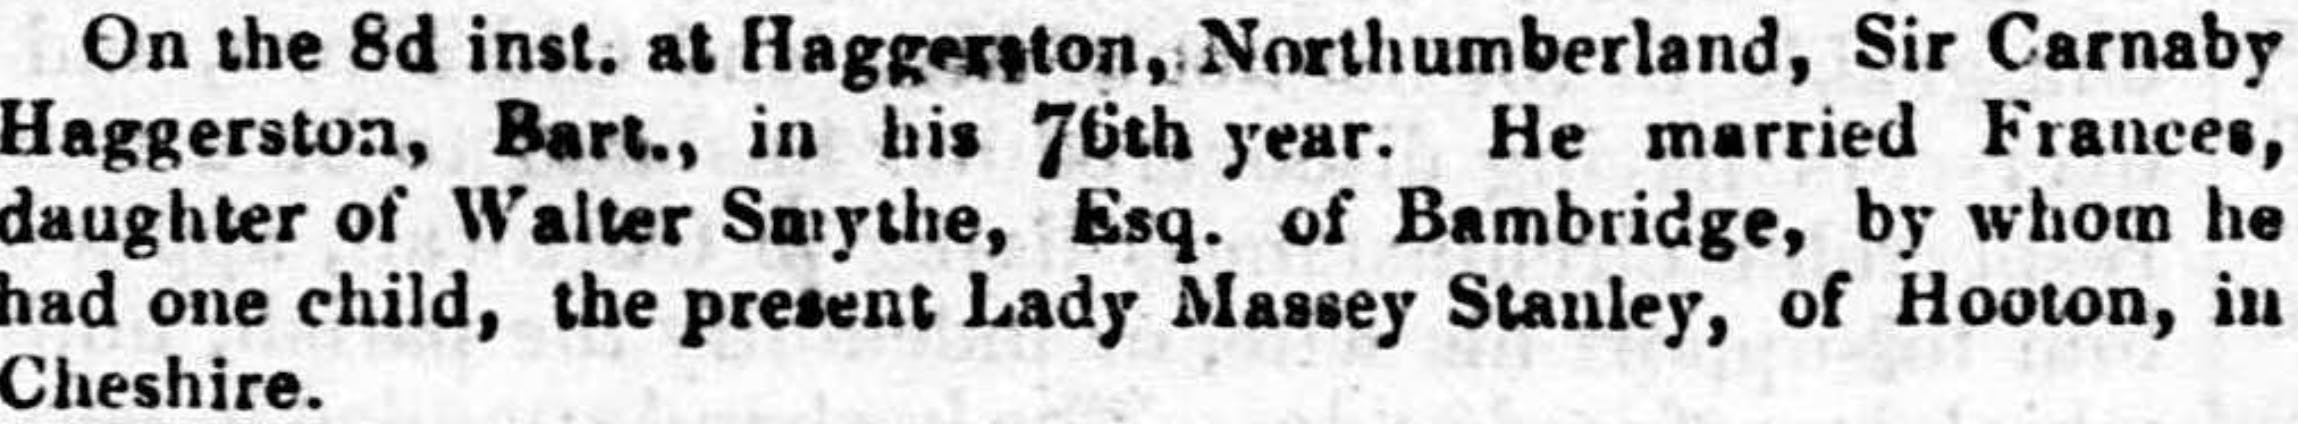 Death announcement of Carnaby Haggerston in 1831